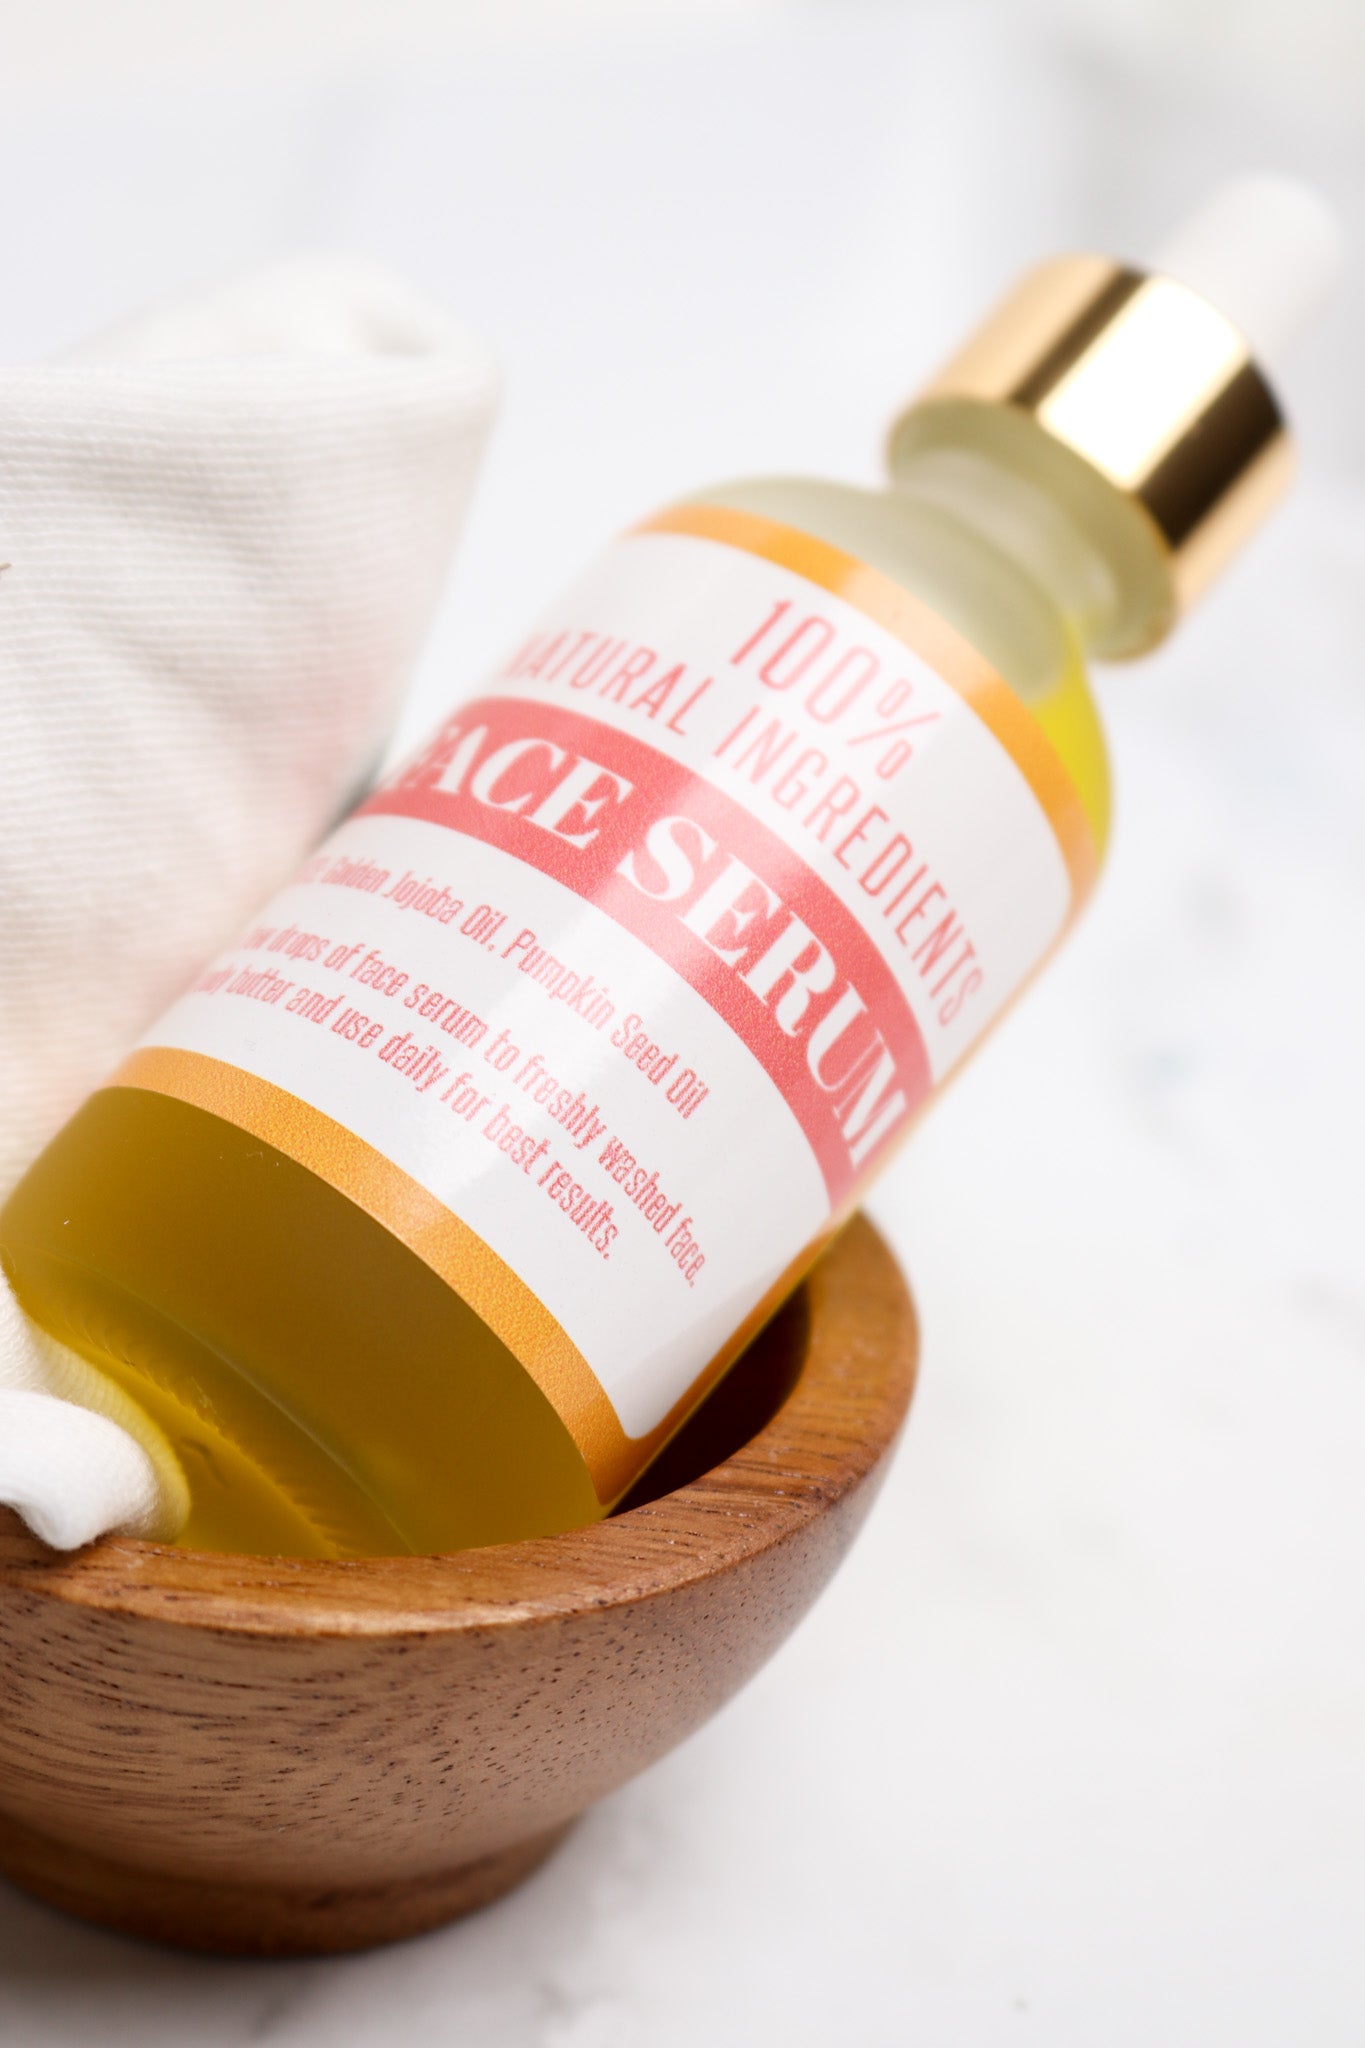 Our Sunny In Denbigh Face Serum is vegan and cruelty free, a great addition to your skin care routine and contains Jojoba Oil which has healing properties for treating a variety of skin conditions. Including Eczema, Acne, psoriasis and some skin blemishes. You can use it as an all over moisturizer or spot treat affected areas